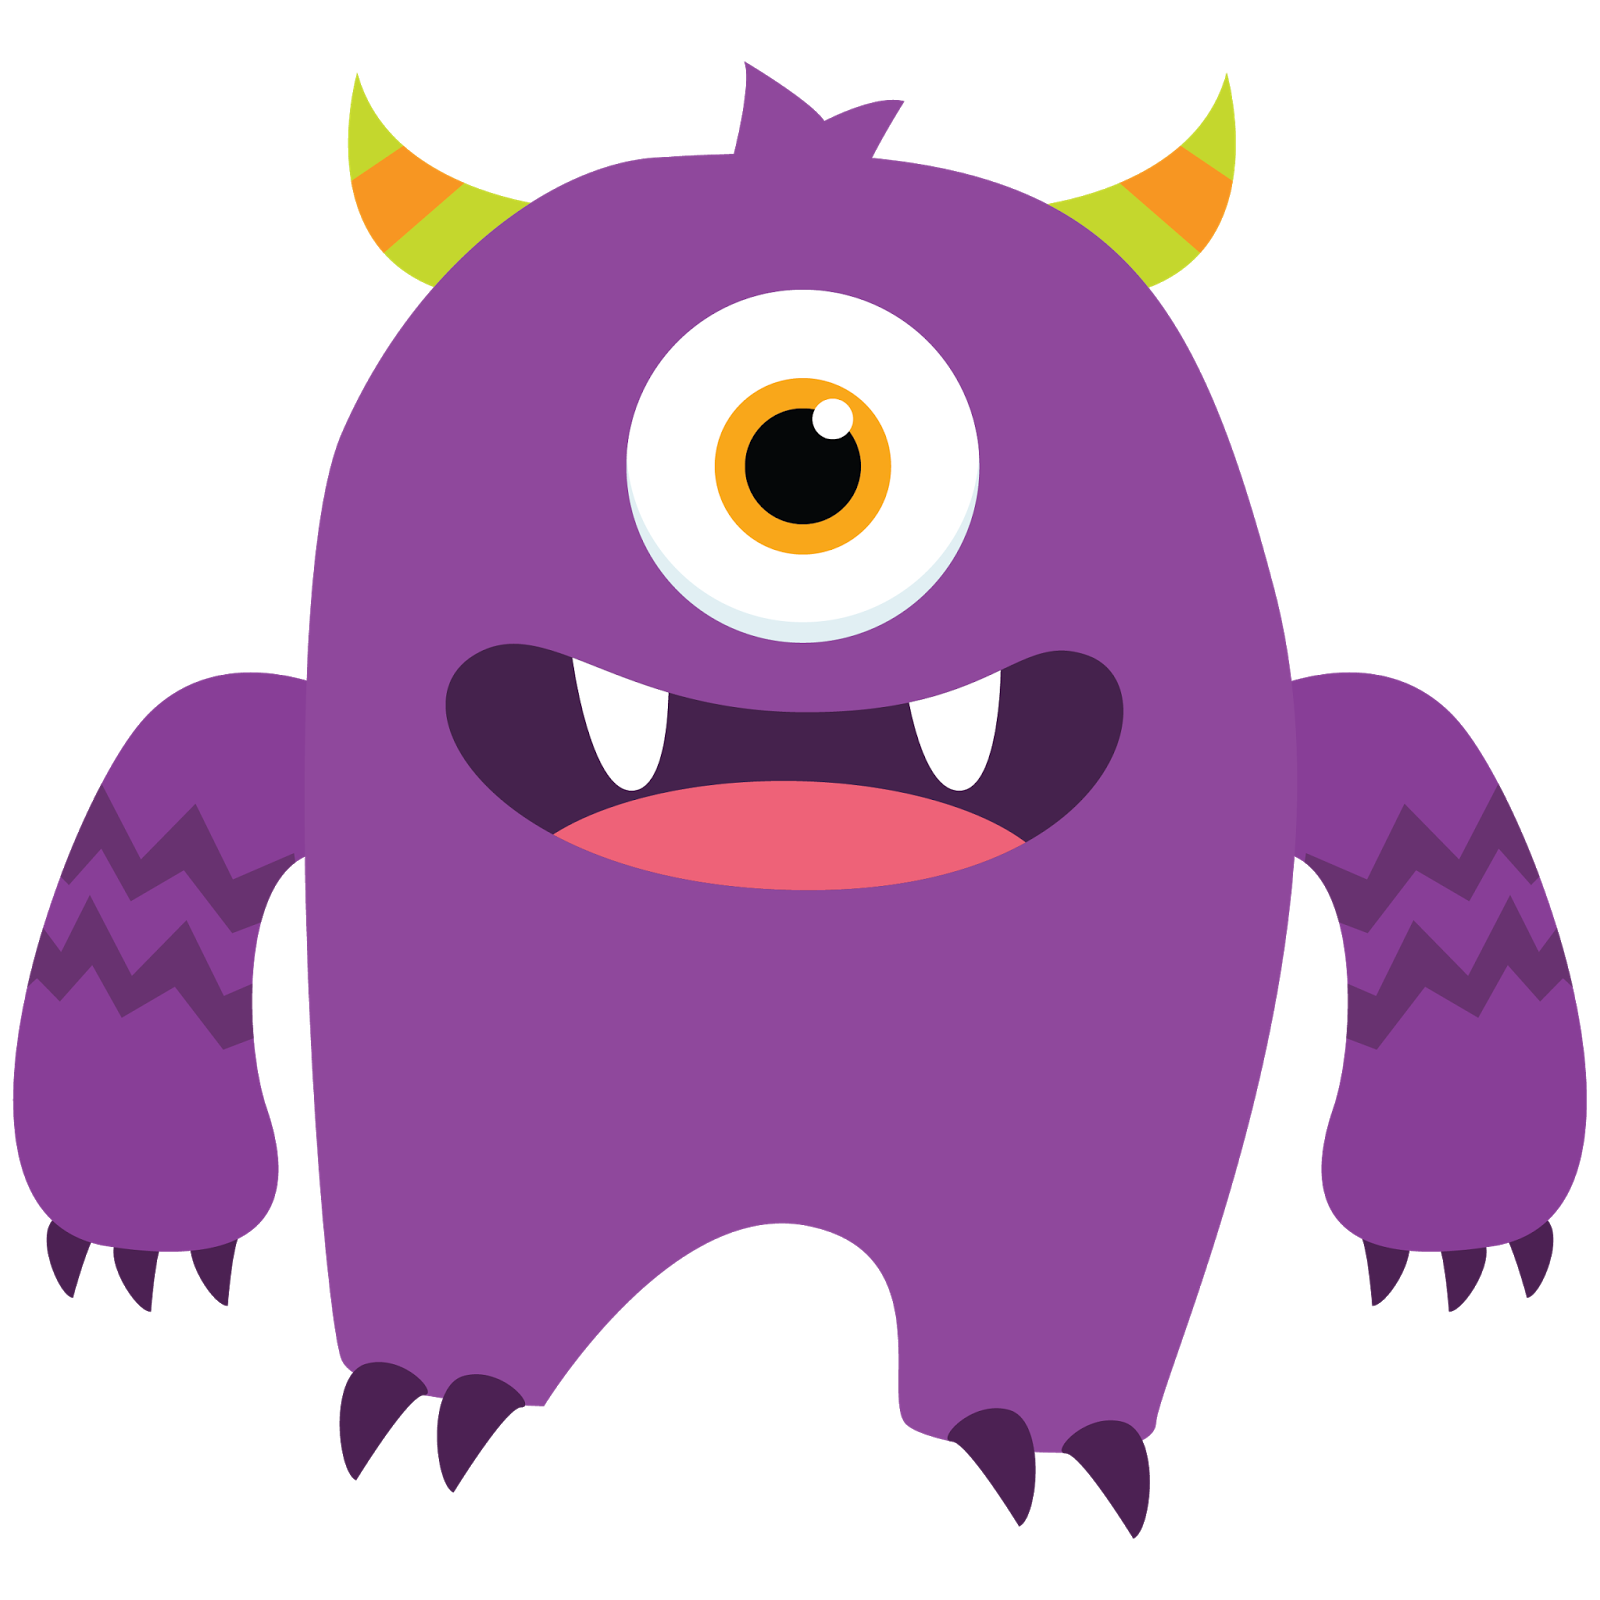 Free images cute pinterest. Hand clipart monster